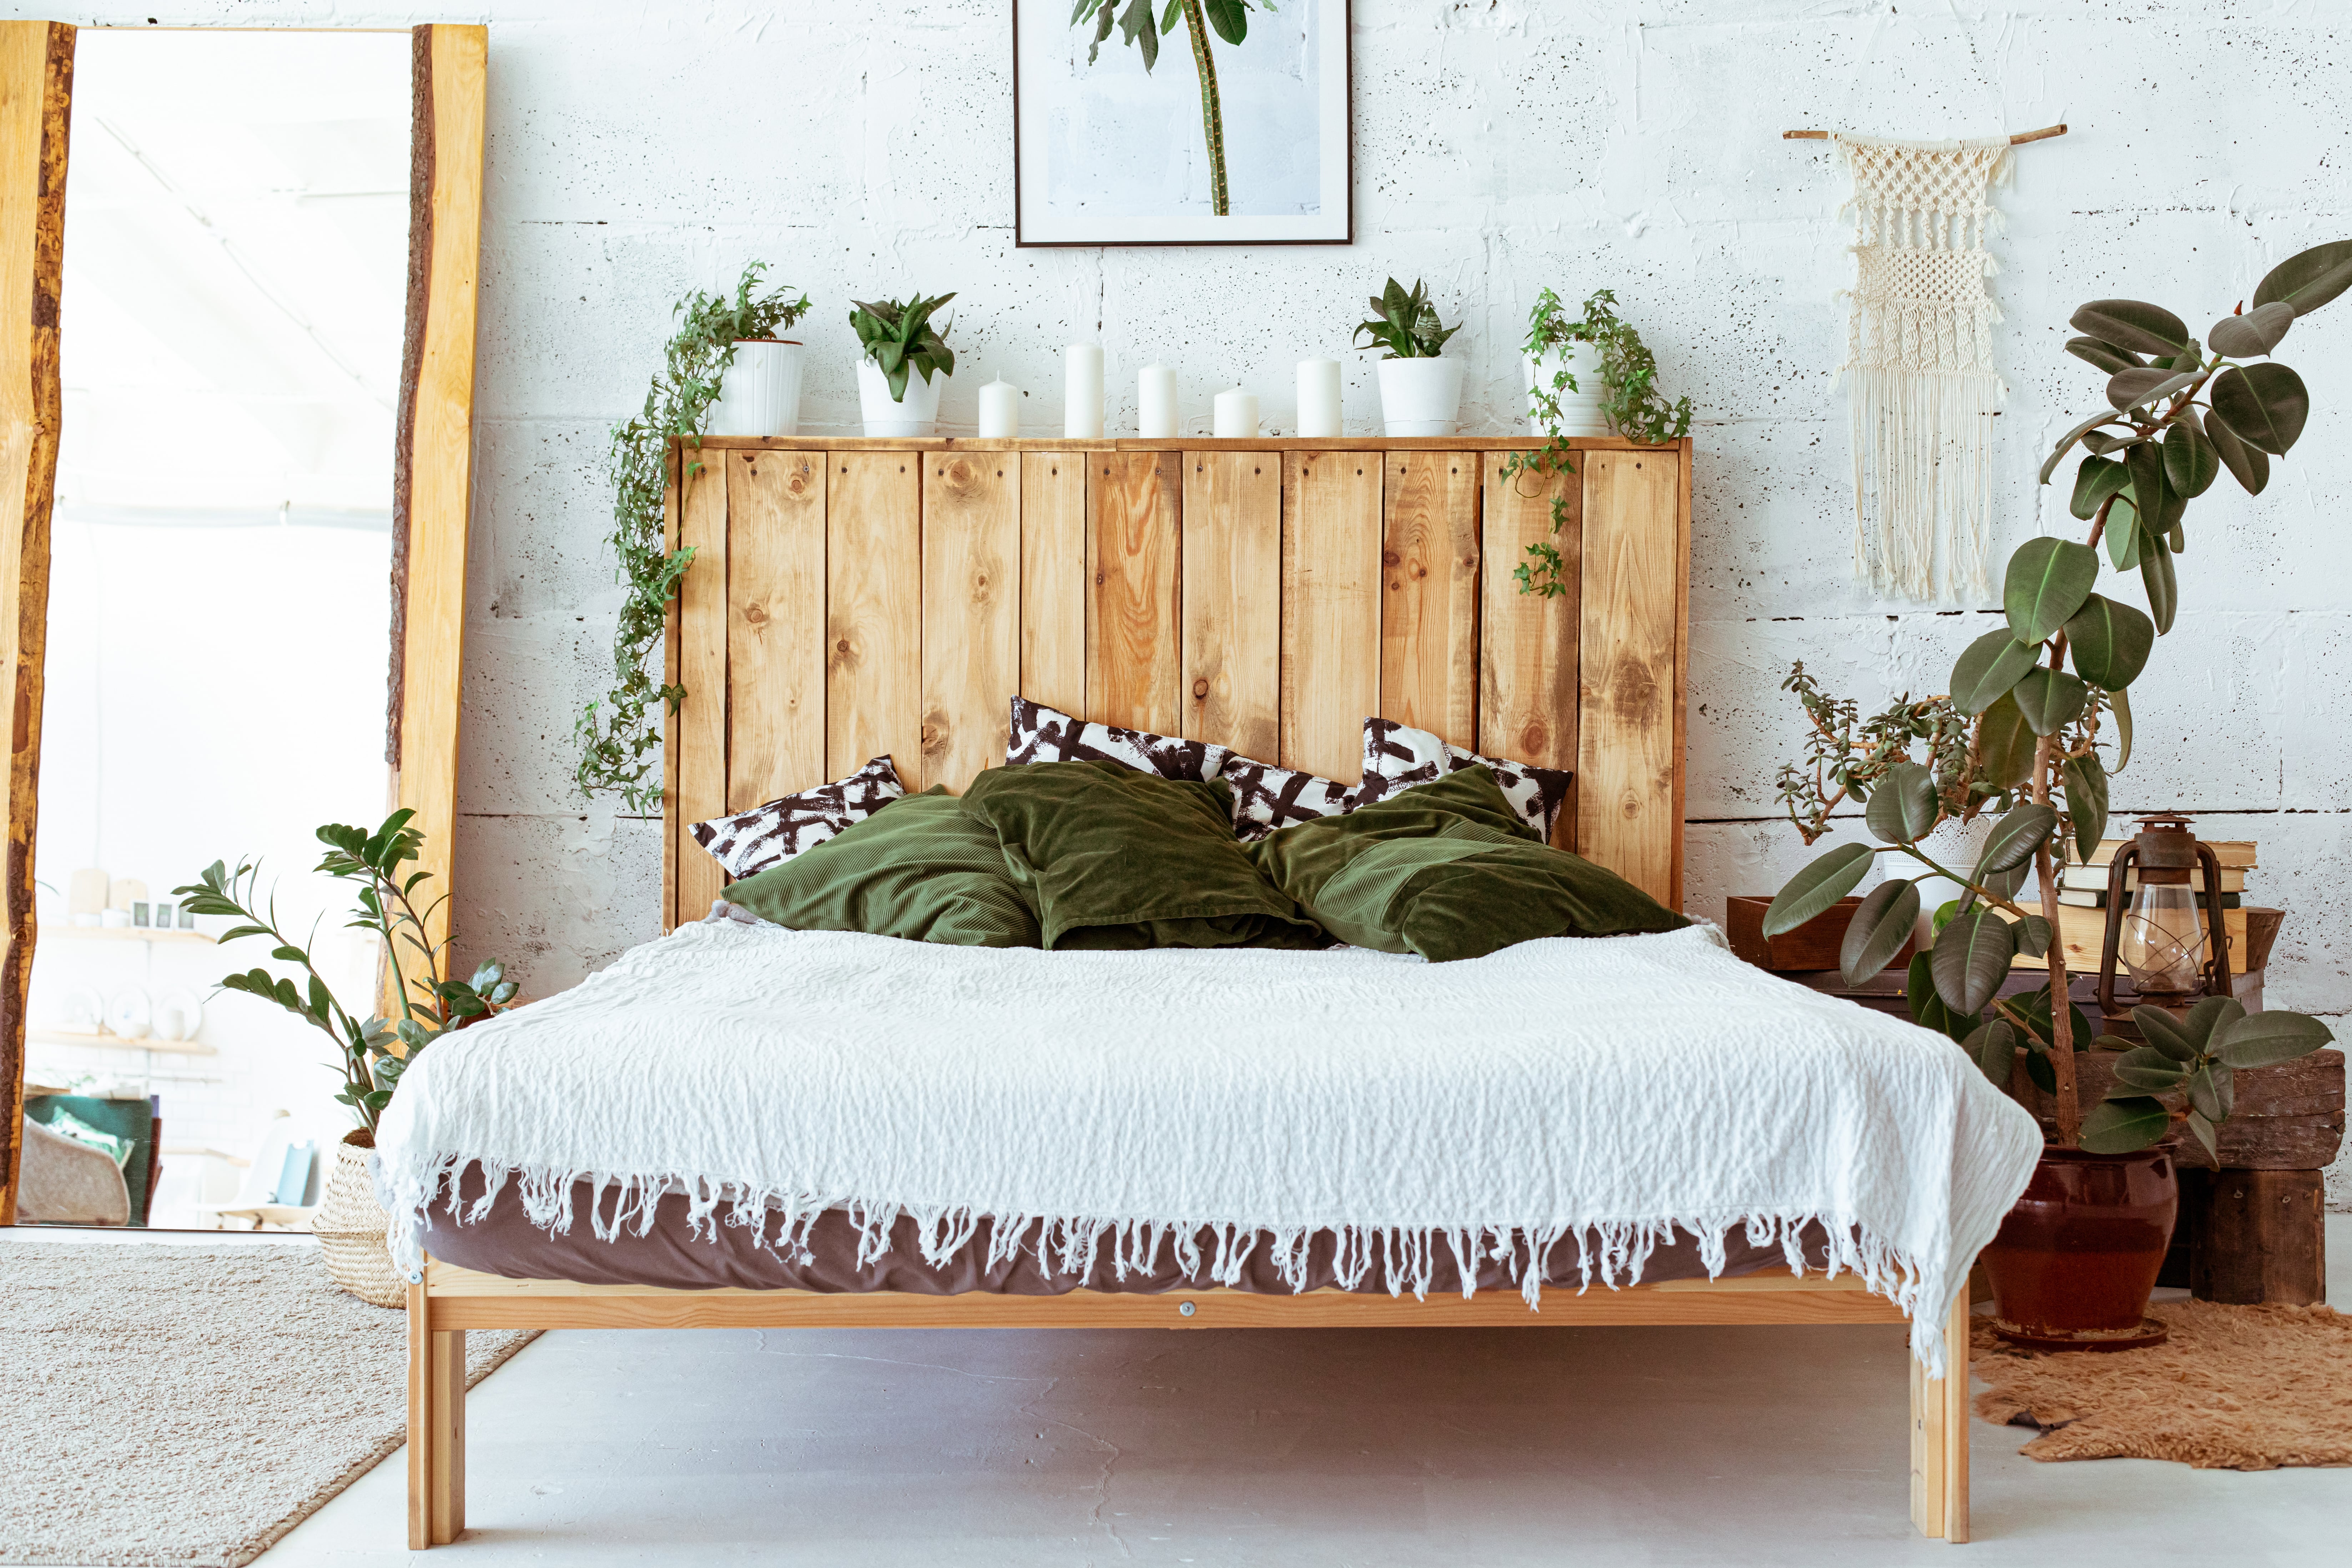 Above-the-Bed Decor Inspiration